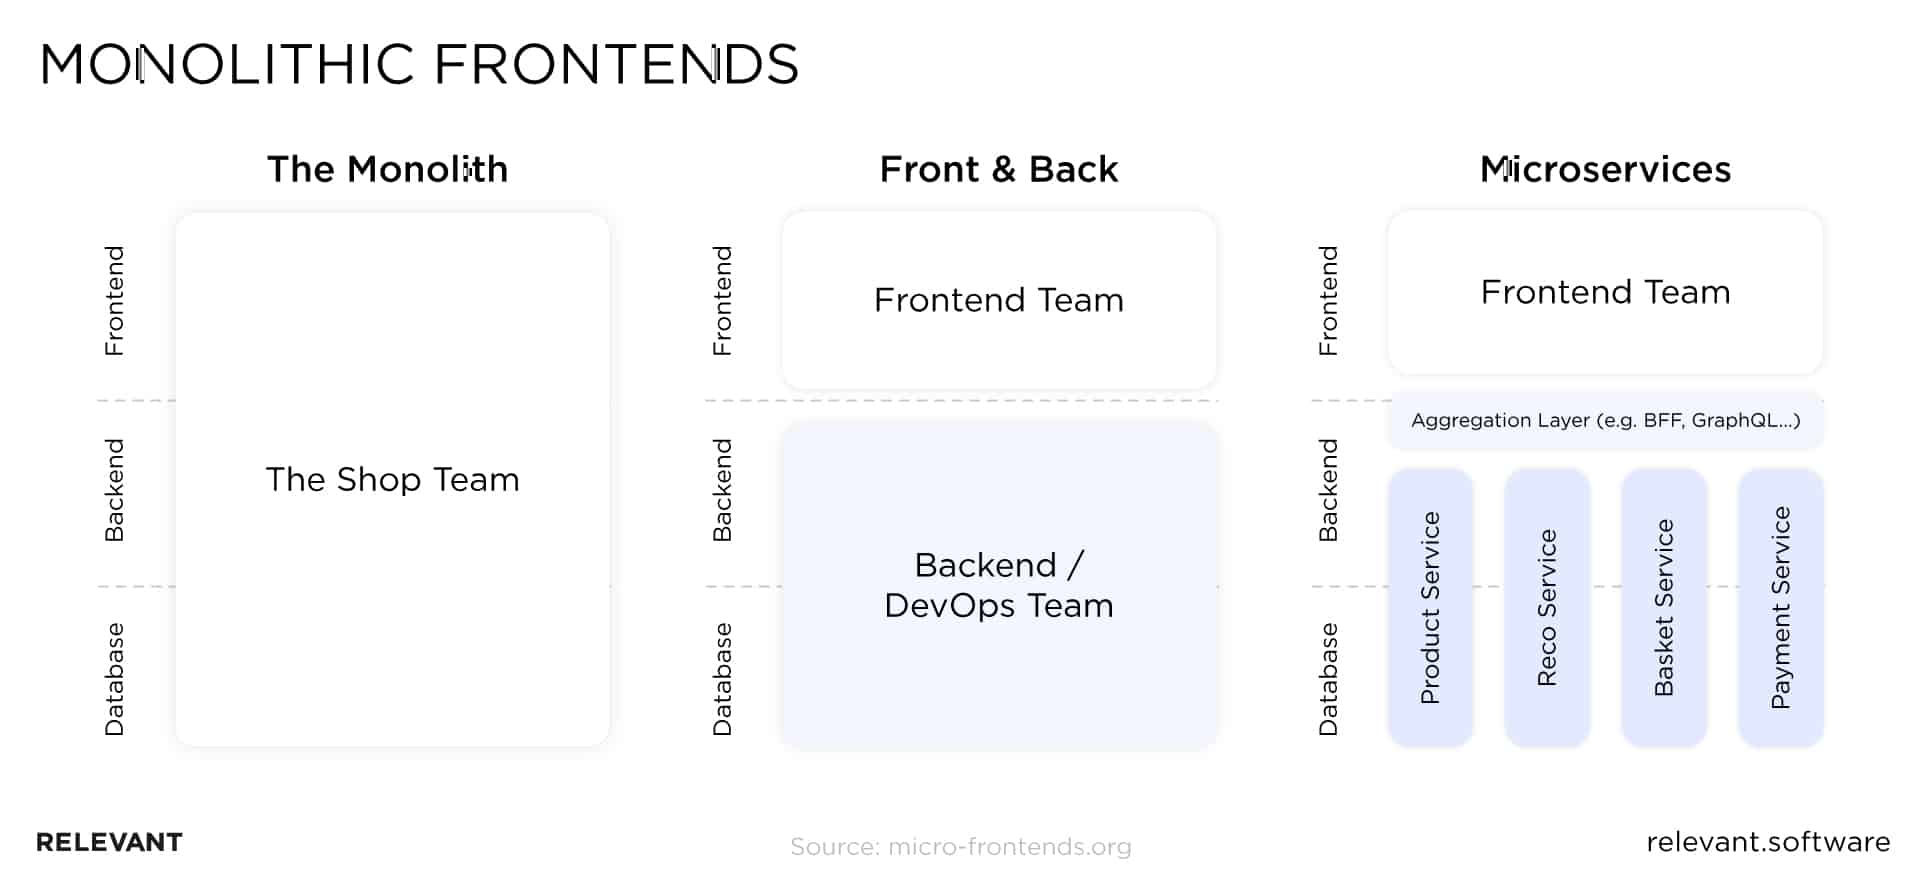 monolithic frontends